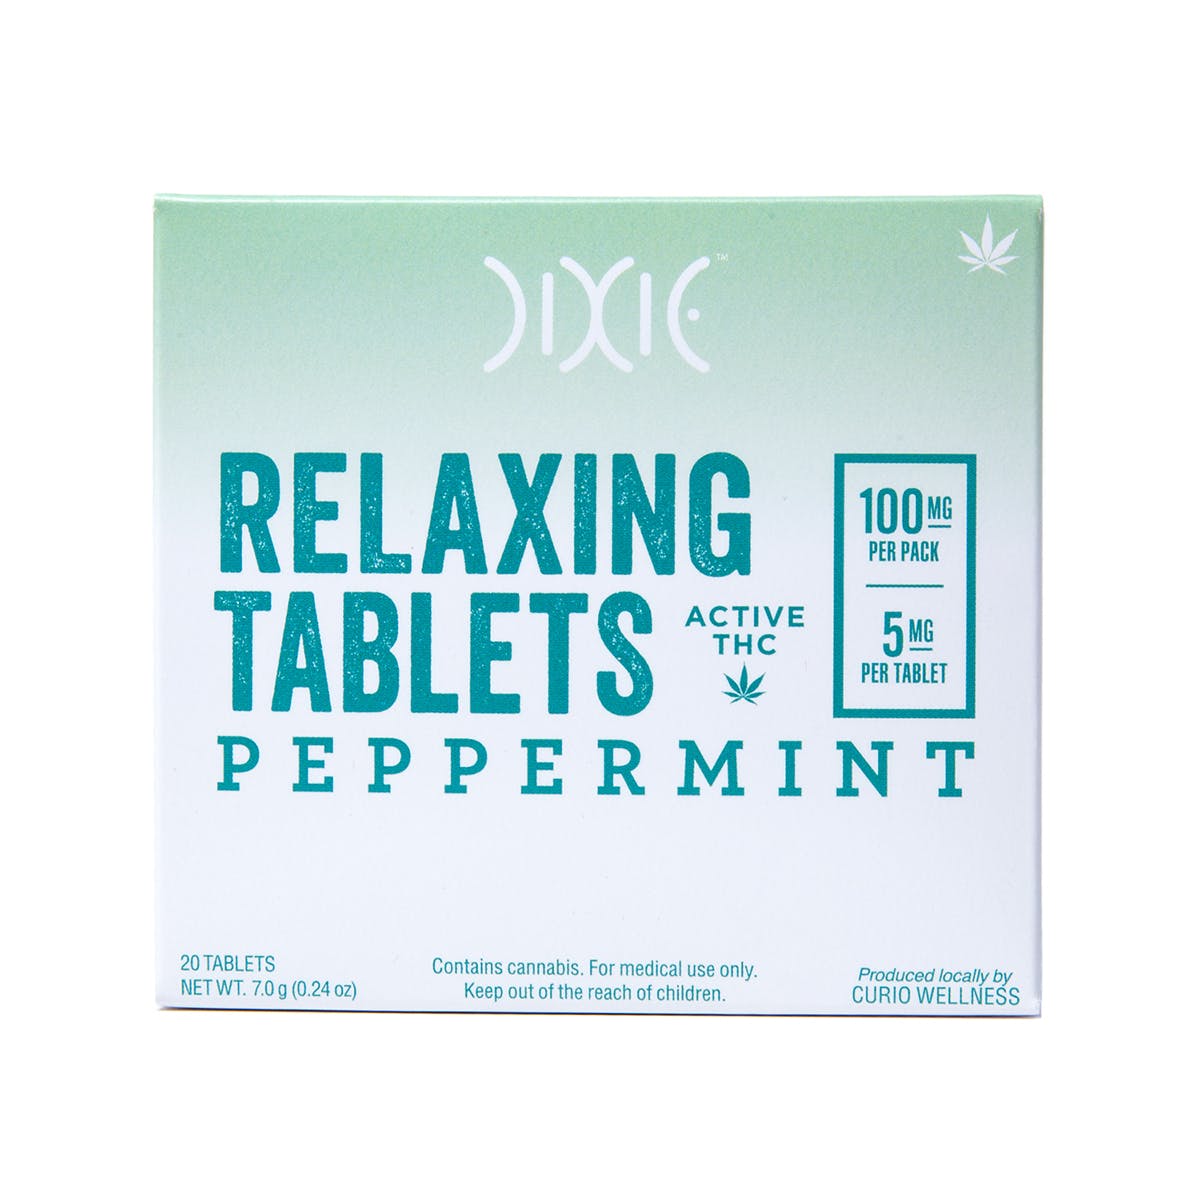 Relaxing Tablets Peppermint 100mg